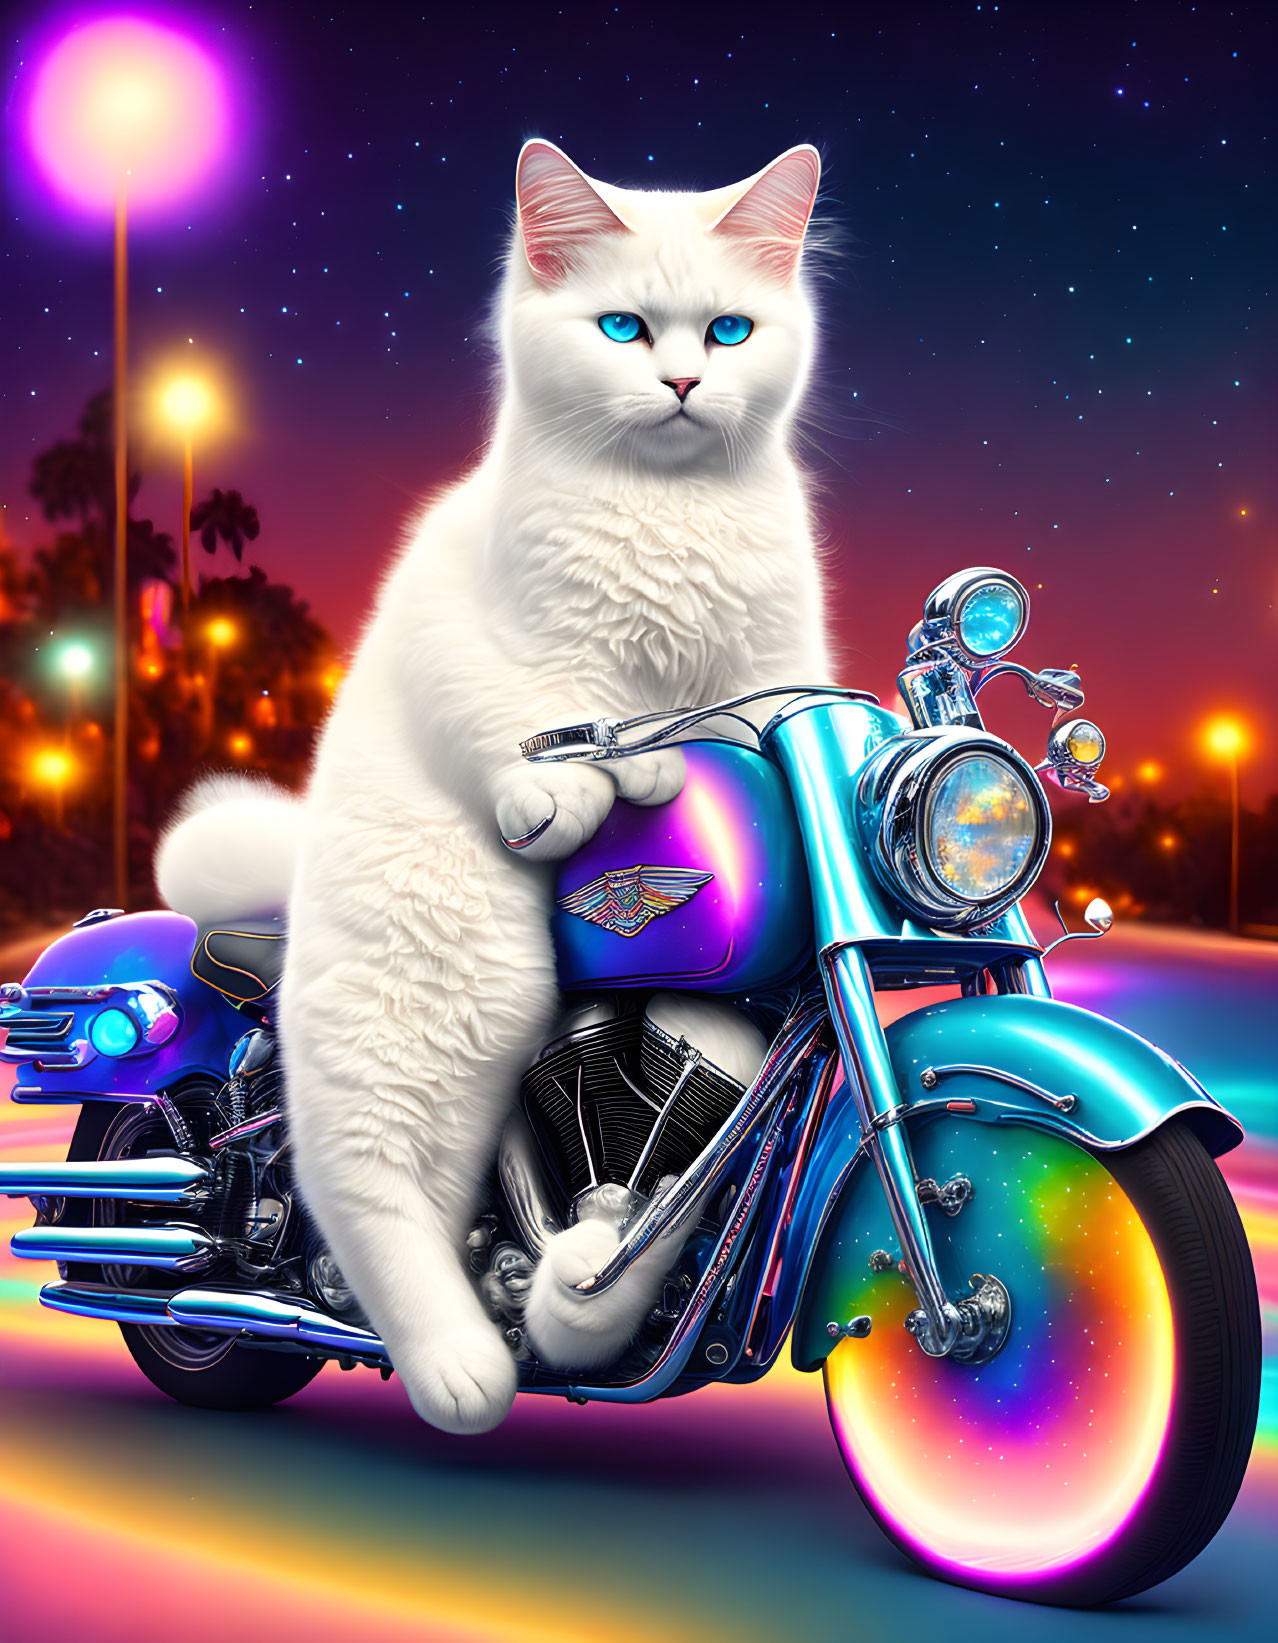 Illustrated white cat on motorcycle under vibrant night sky